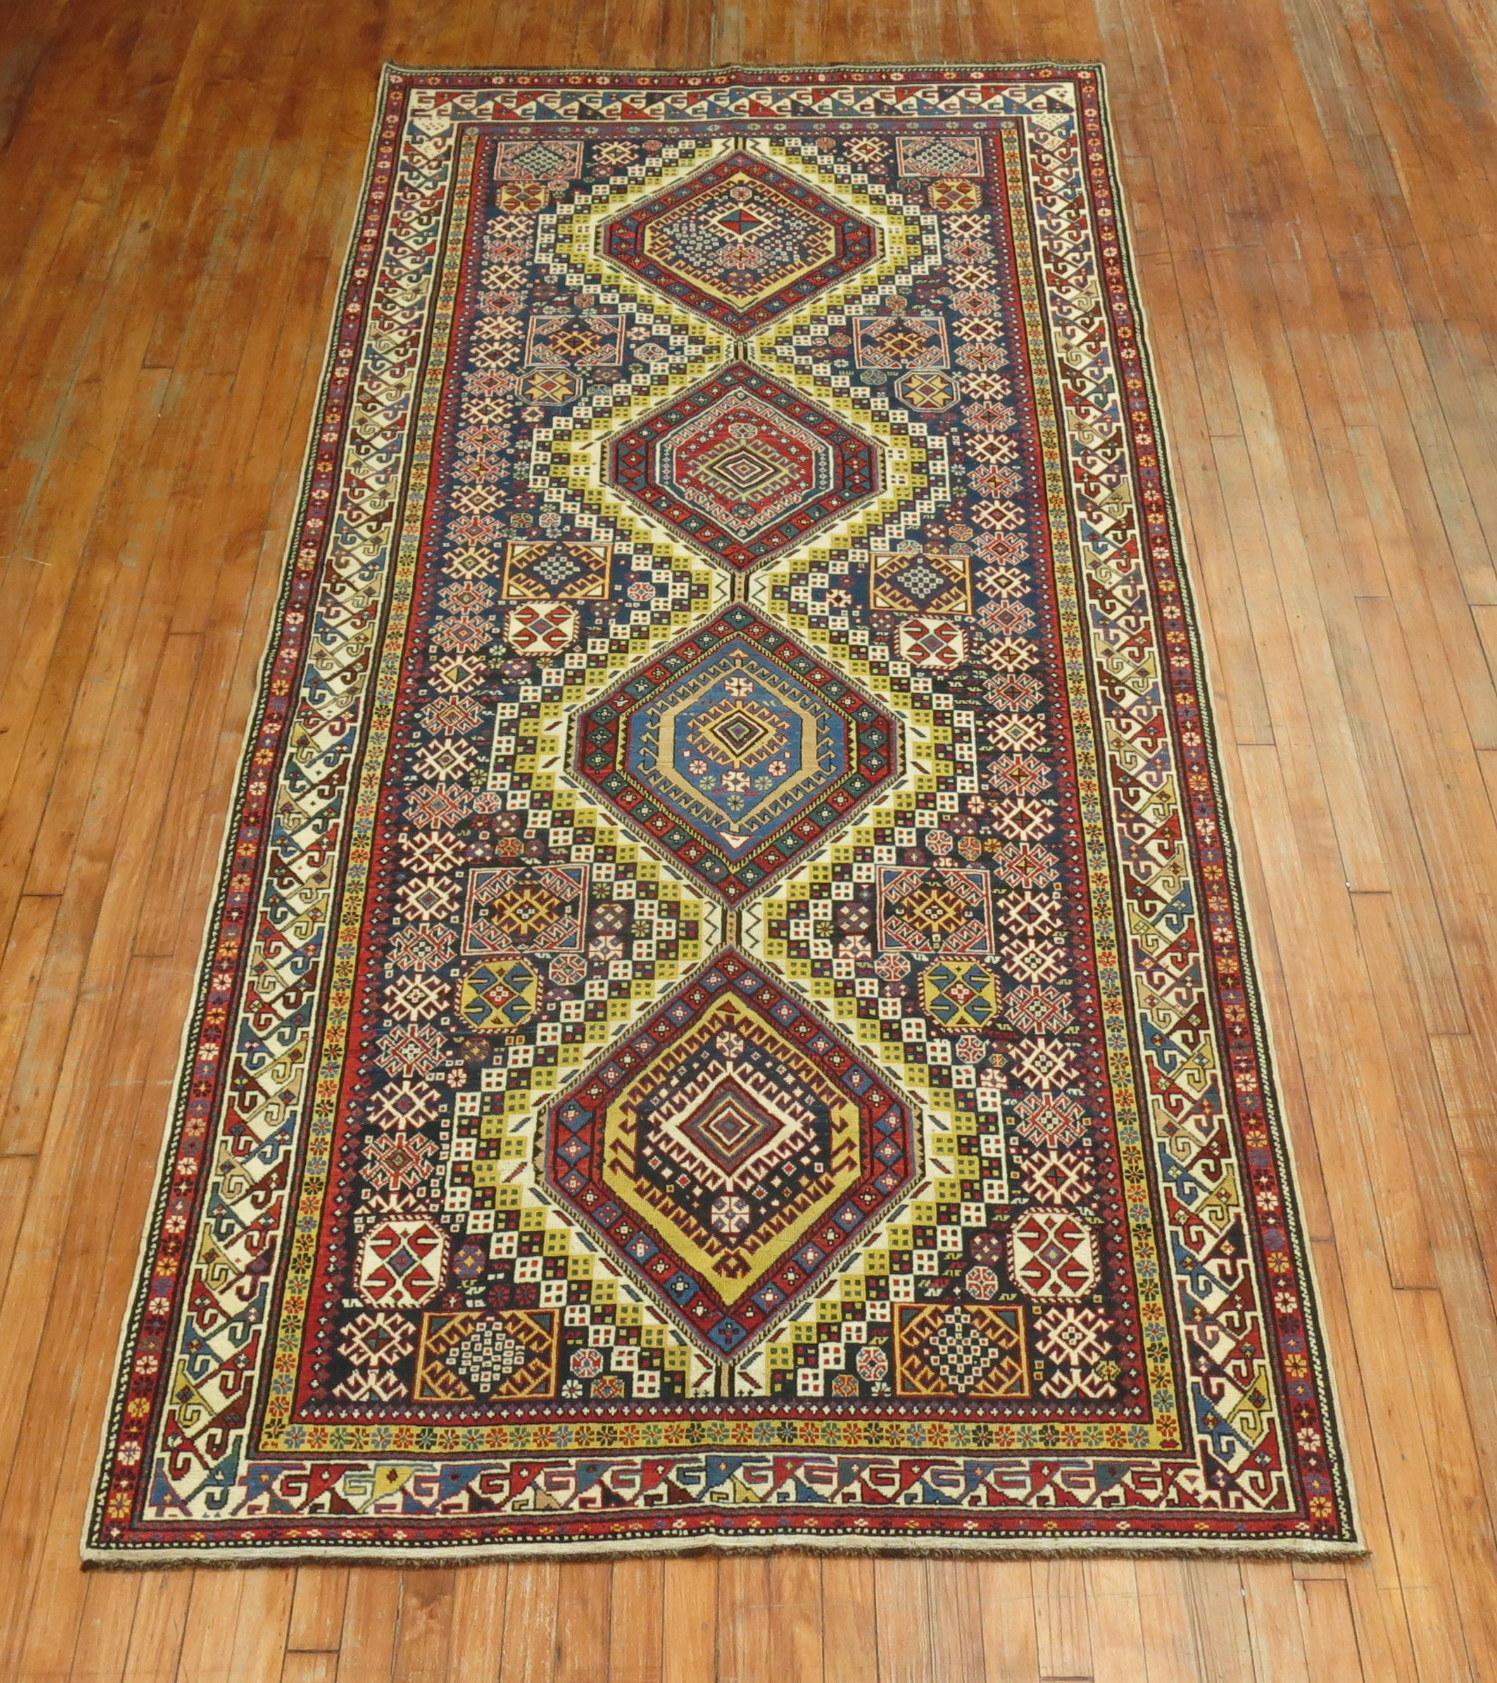 A rare size, authentic one-of-a-kind handmade late 19th century Caucasian wide gallery size runner.

Measures: 4'9